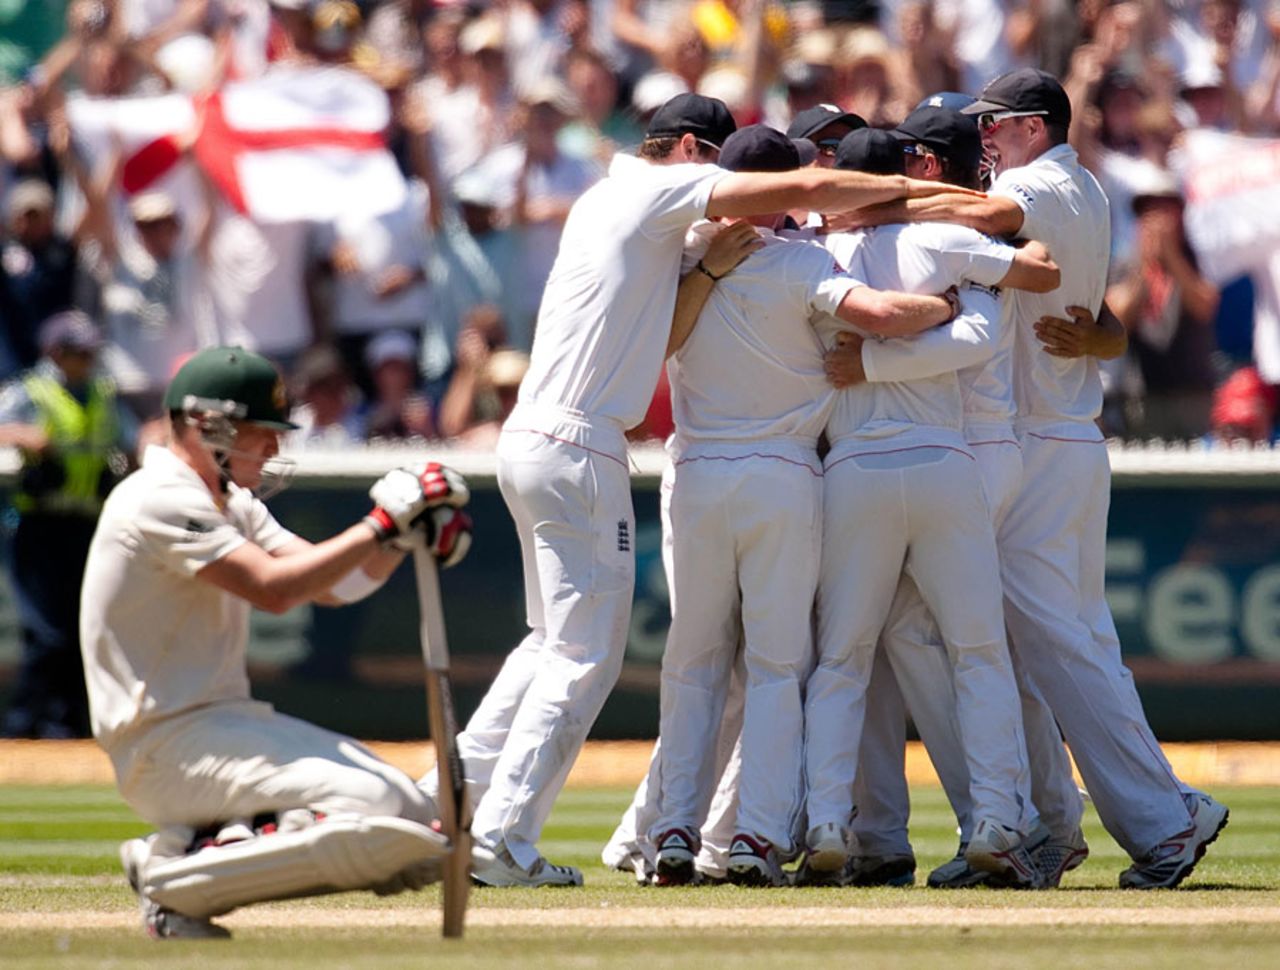 Brad Haddin sinks to his knees as England celebrate the matchwinning wicket, Australia v England, 4th Test, Melbourne, 4th day, December 29, 2010